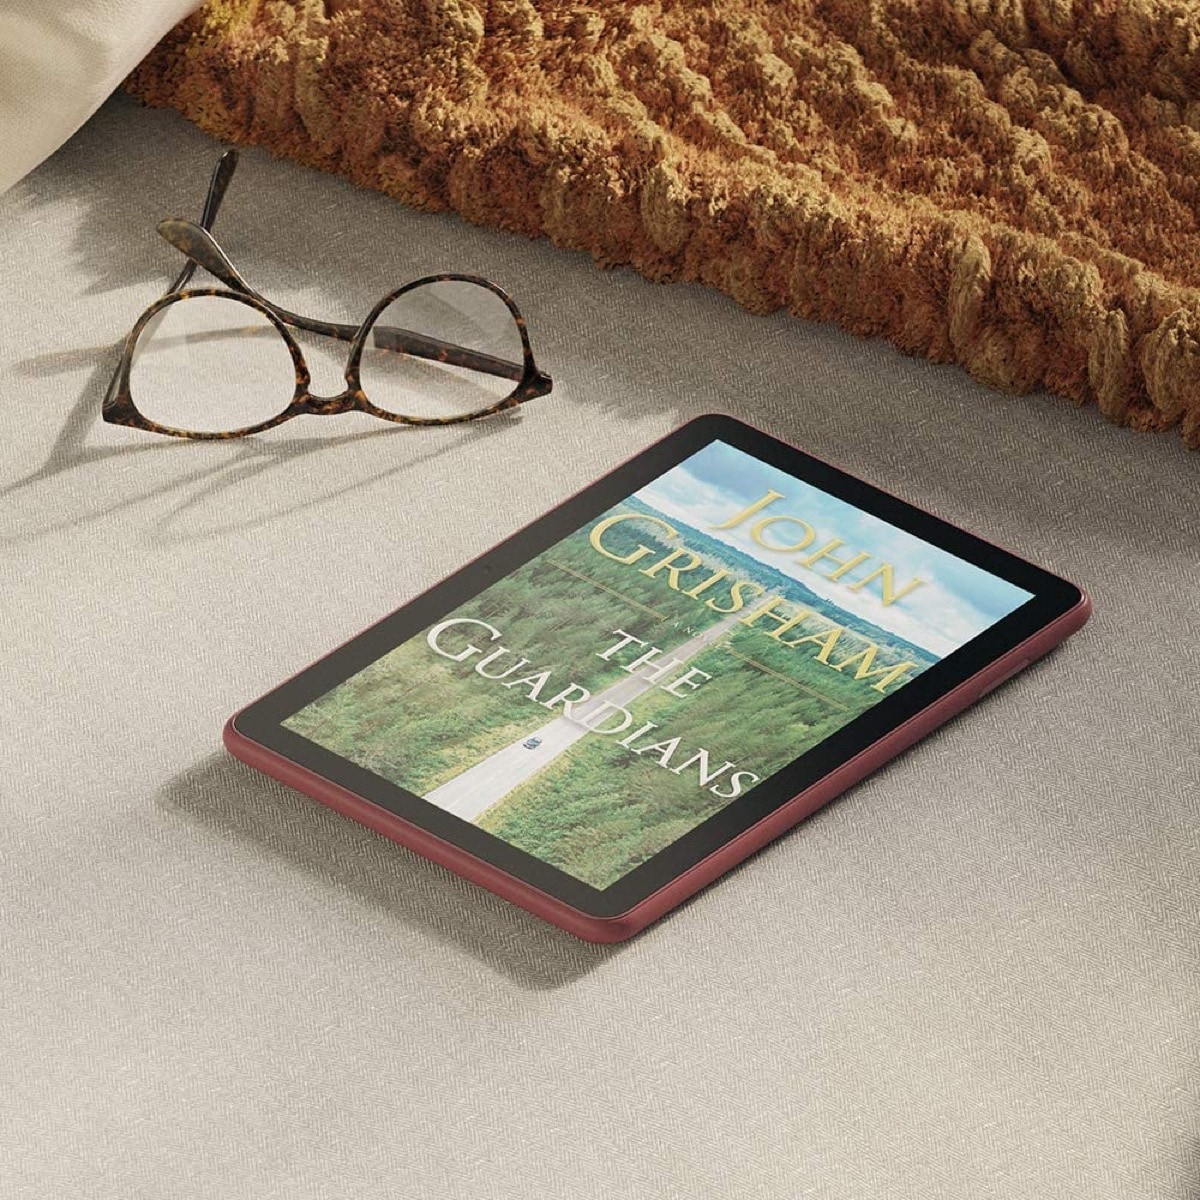 Amazon Fire tablet for reading – choose HD display for crisp text